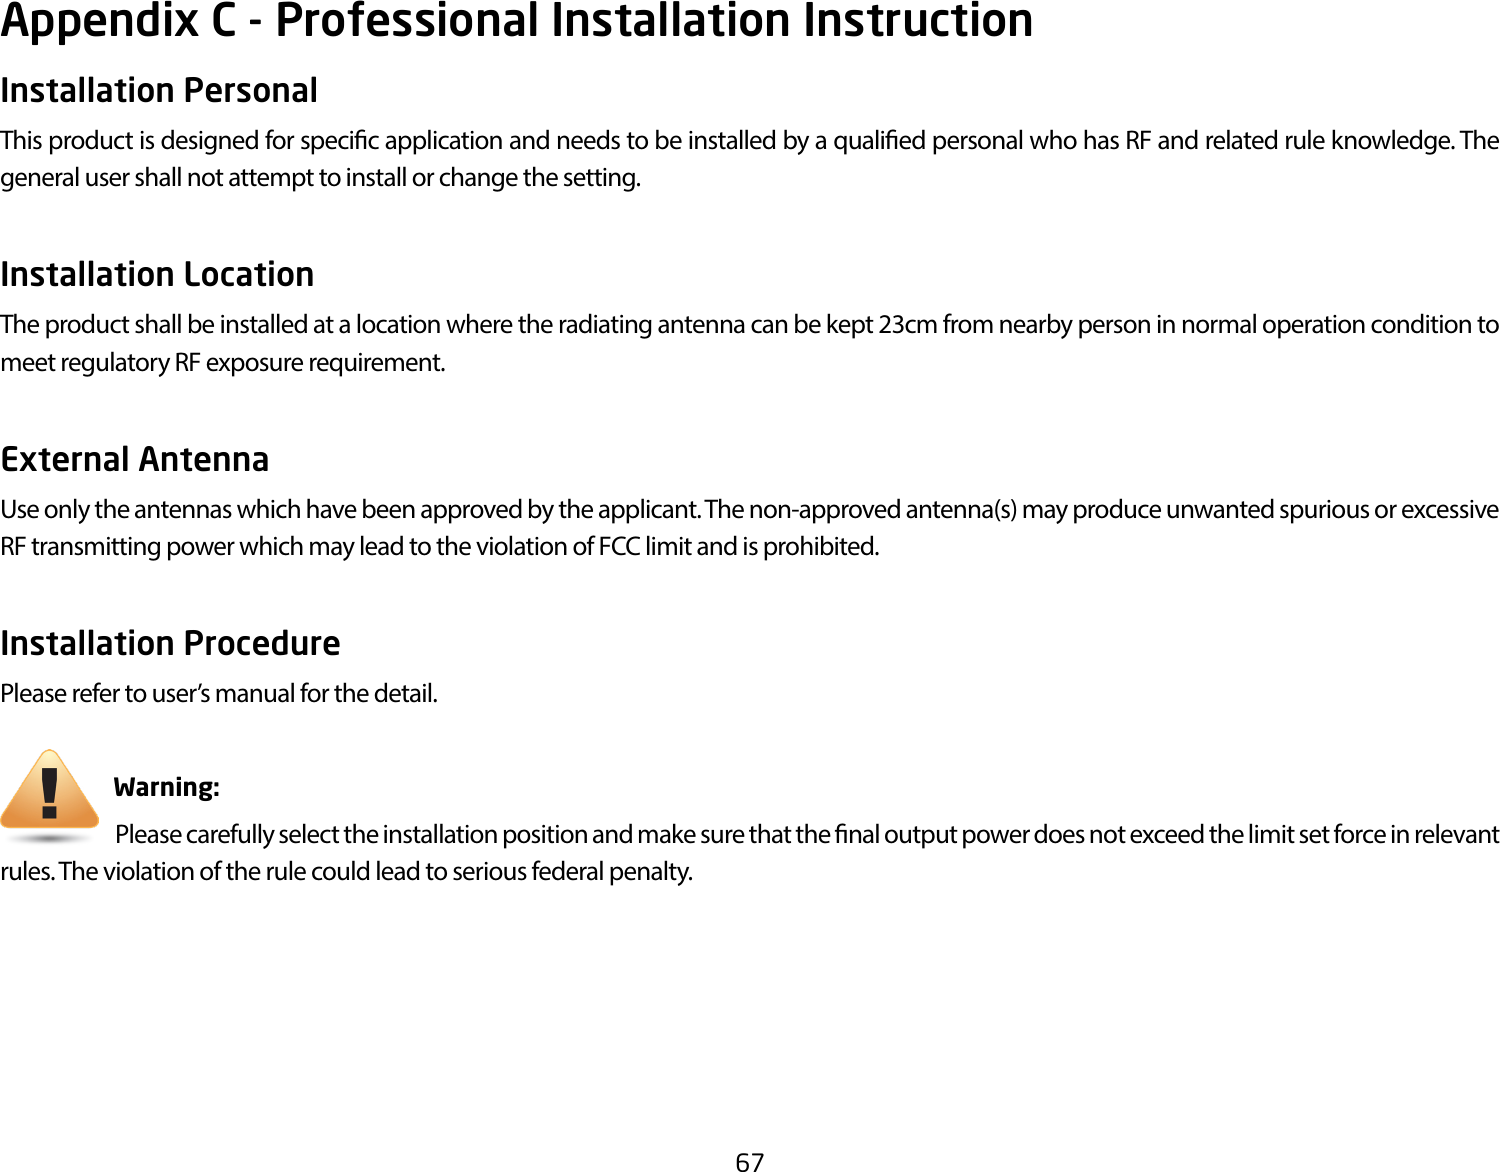 67Appendix C - Professional Installation InstructionInstallation Personal This product is designed for specic application and needs to be installed by a qualied personal who has RF and related rule knowledge. The general user shall not attempt to install or change the setting.Installation Location The product shall be installed at a location where the radiating antenna can be kept 23cm from nearby person in normal operation condition to meet regulatory RF exposure requirement.External Antenna Use only the antennas which have been approved by the applicant. The non-approved antenna(s) may produce unwanted spurious or excessive RF transmitting power which may lead to the violation of FCC limit and is prohibited.Installation ProcedurePlease refer to user’s manual for the detail.                       Warning:                             Please carefully select the installation position and make sure that the nal output power does not exceed the limit set force in relevant rules. The violation of the rule could lead to serious federal penalty.